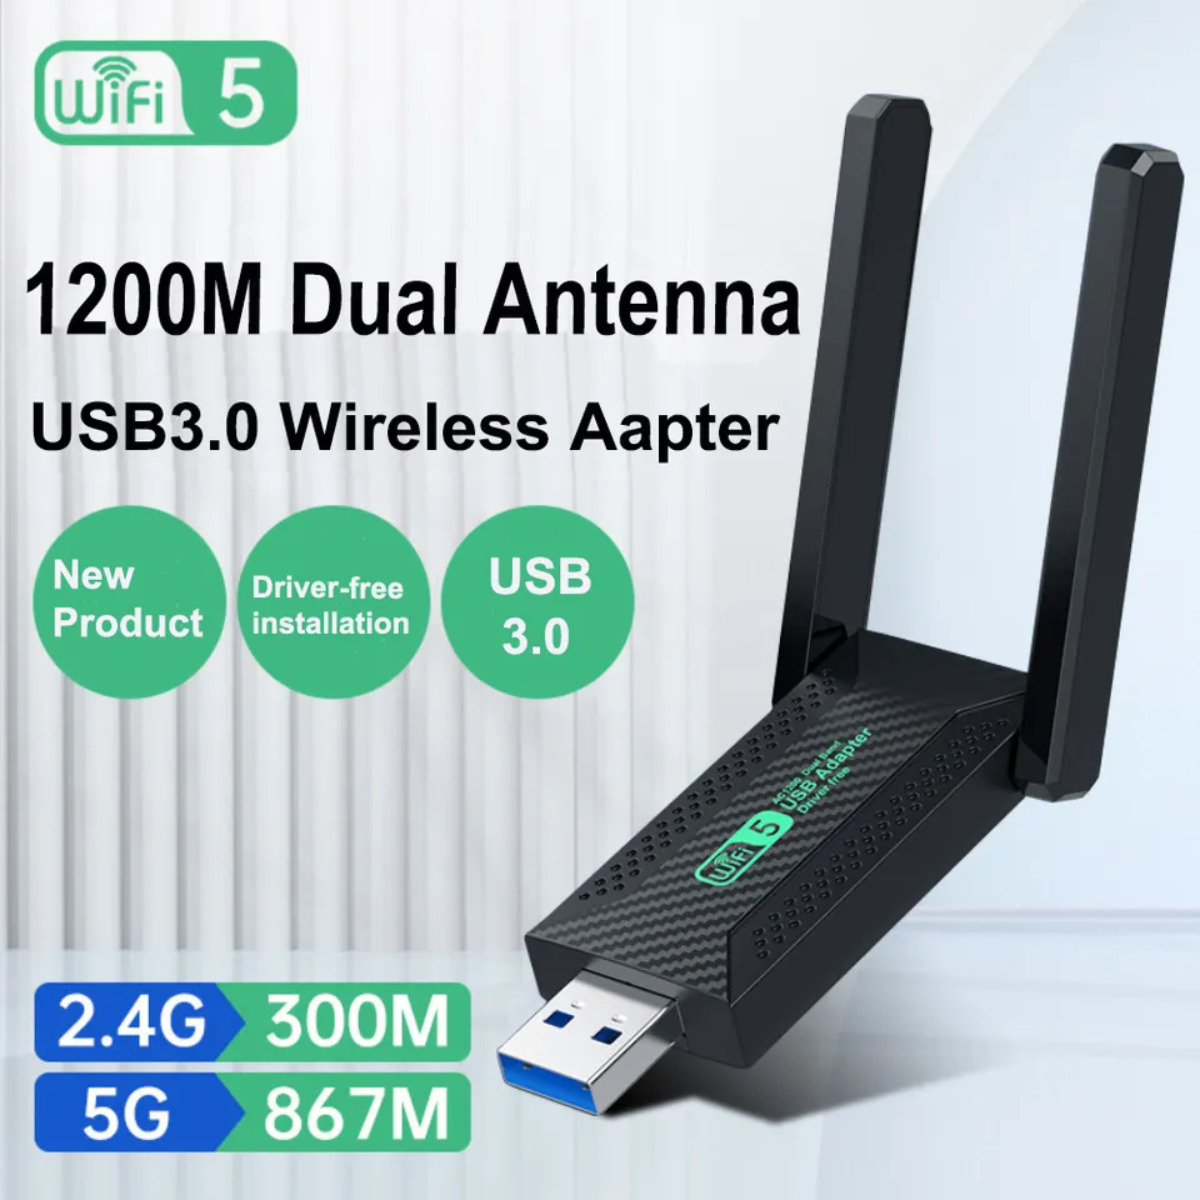 THE FASTEST Dual Band WiFi Adapter, 150 Mb/sec, 1200 Mbps, 802.11ac/a/bgn